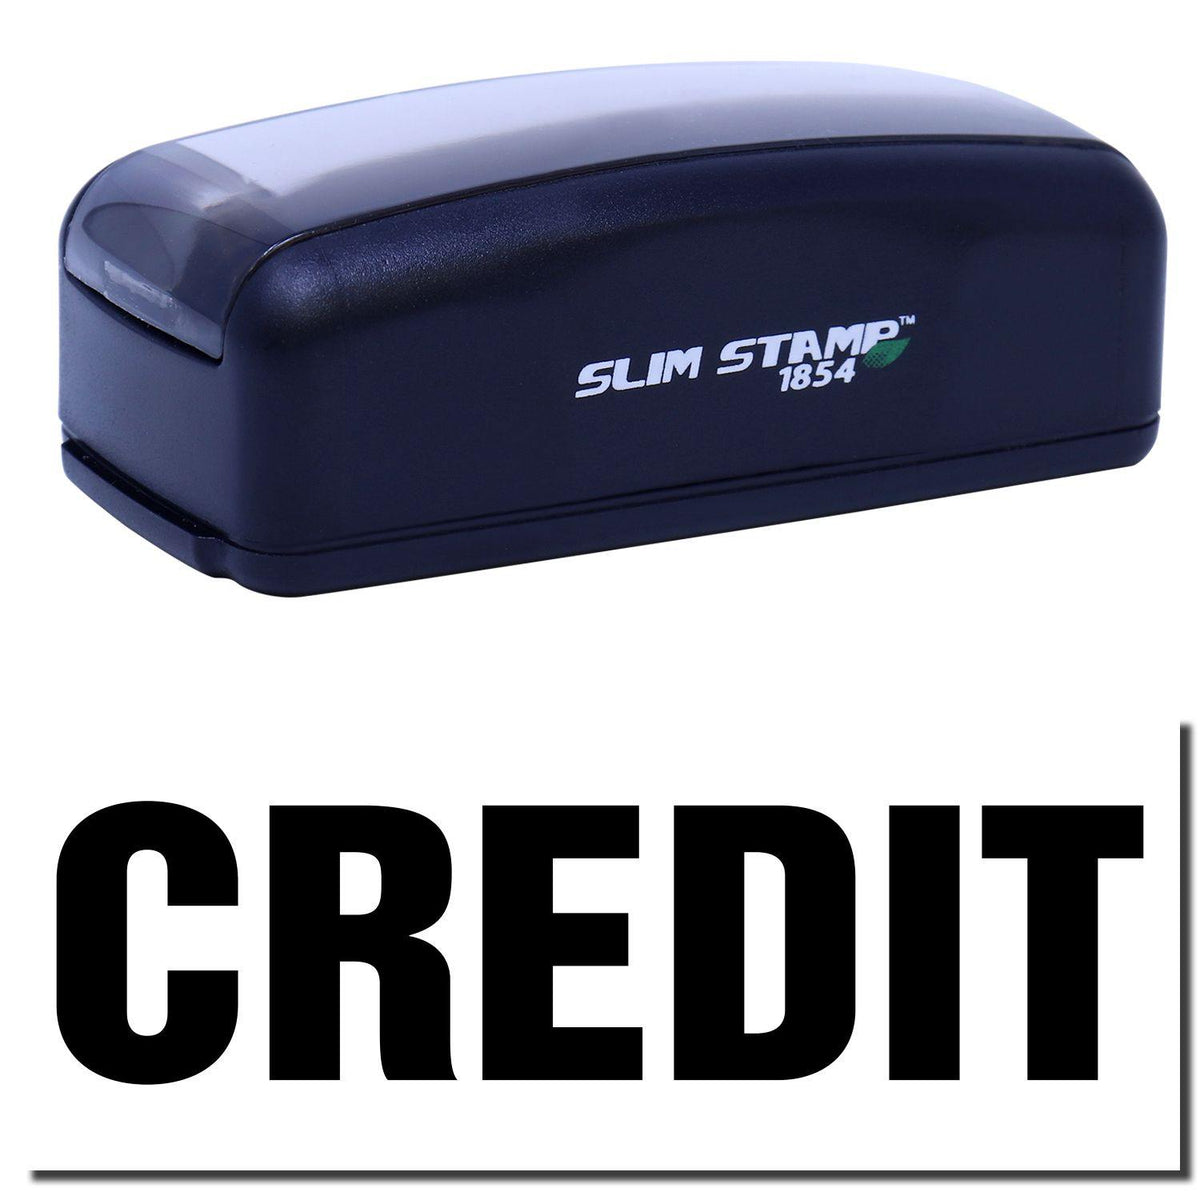 A stock office pre-inked stamp with a stamped image showing how the text &quot;CREDIT&quot; in a large font is displayed after stamping.